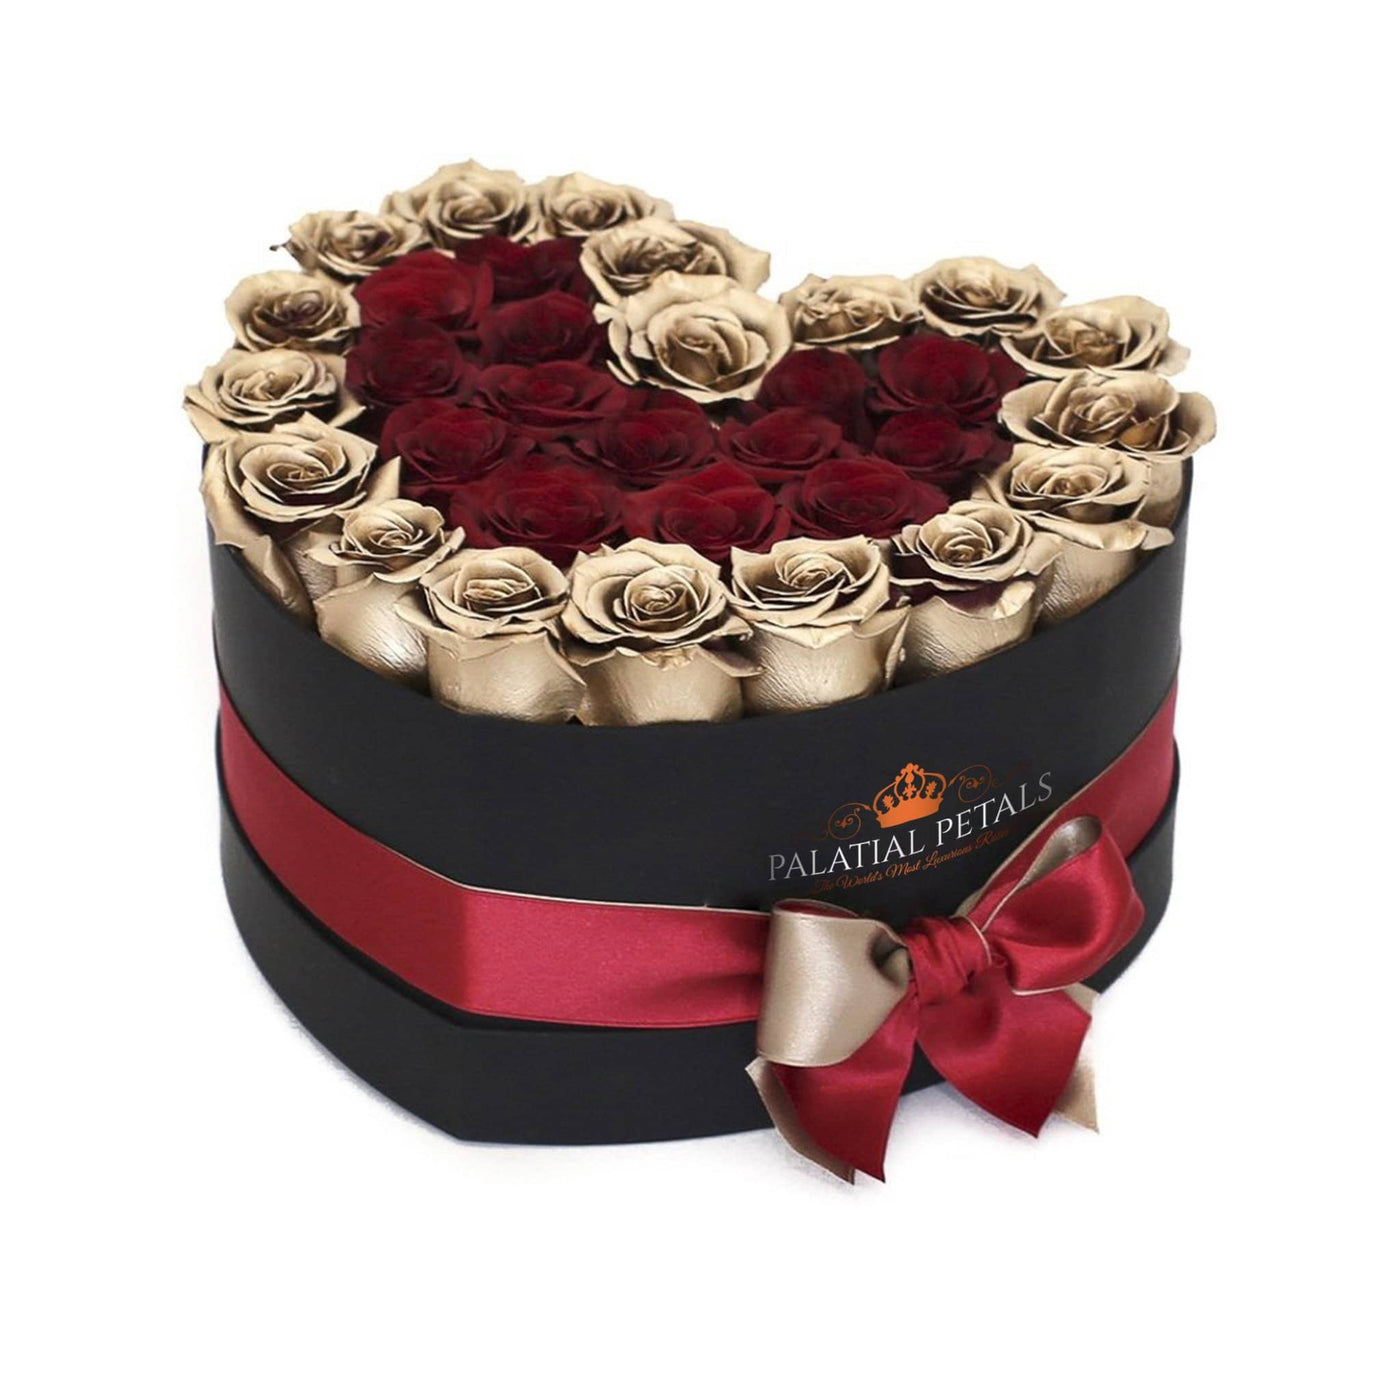 24k Gold & Red Roses That Last A Year - Love Heart Rose Box